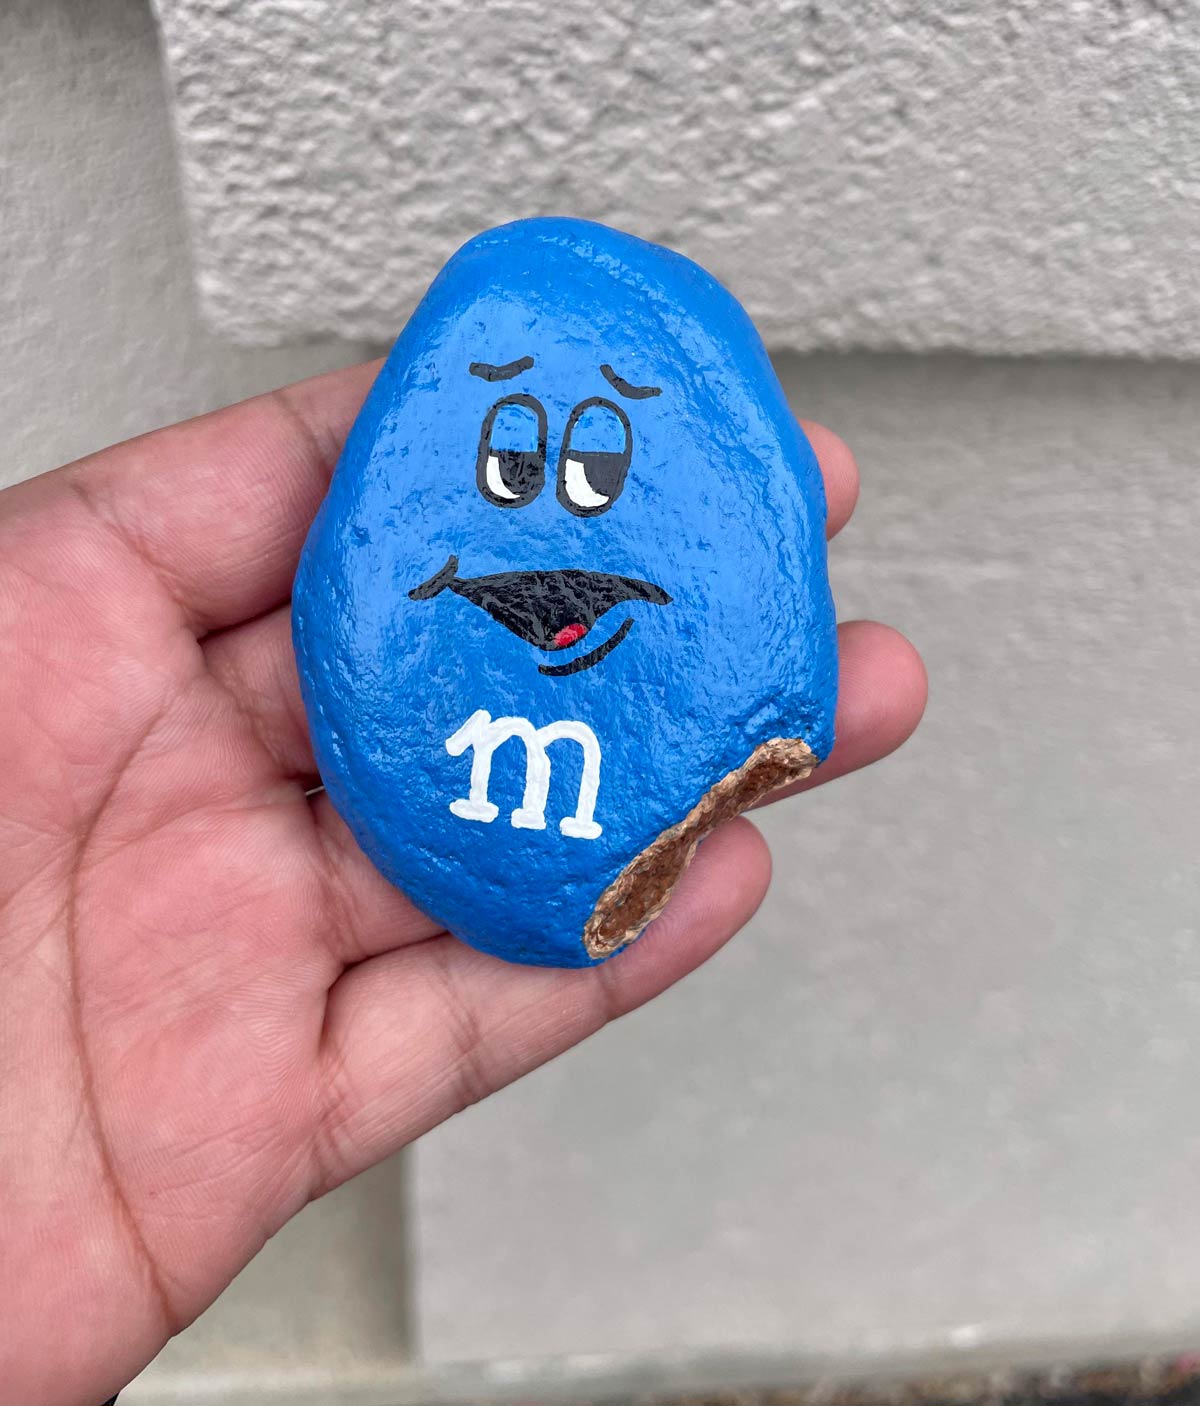 This rock I found that’s painted like an M&M